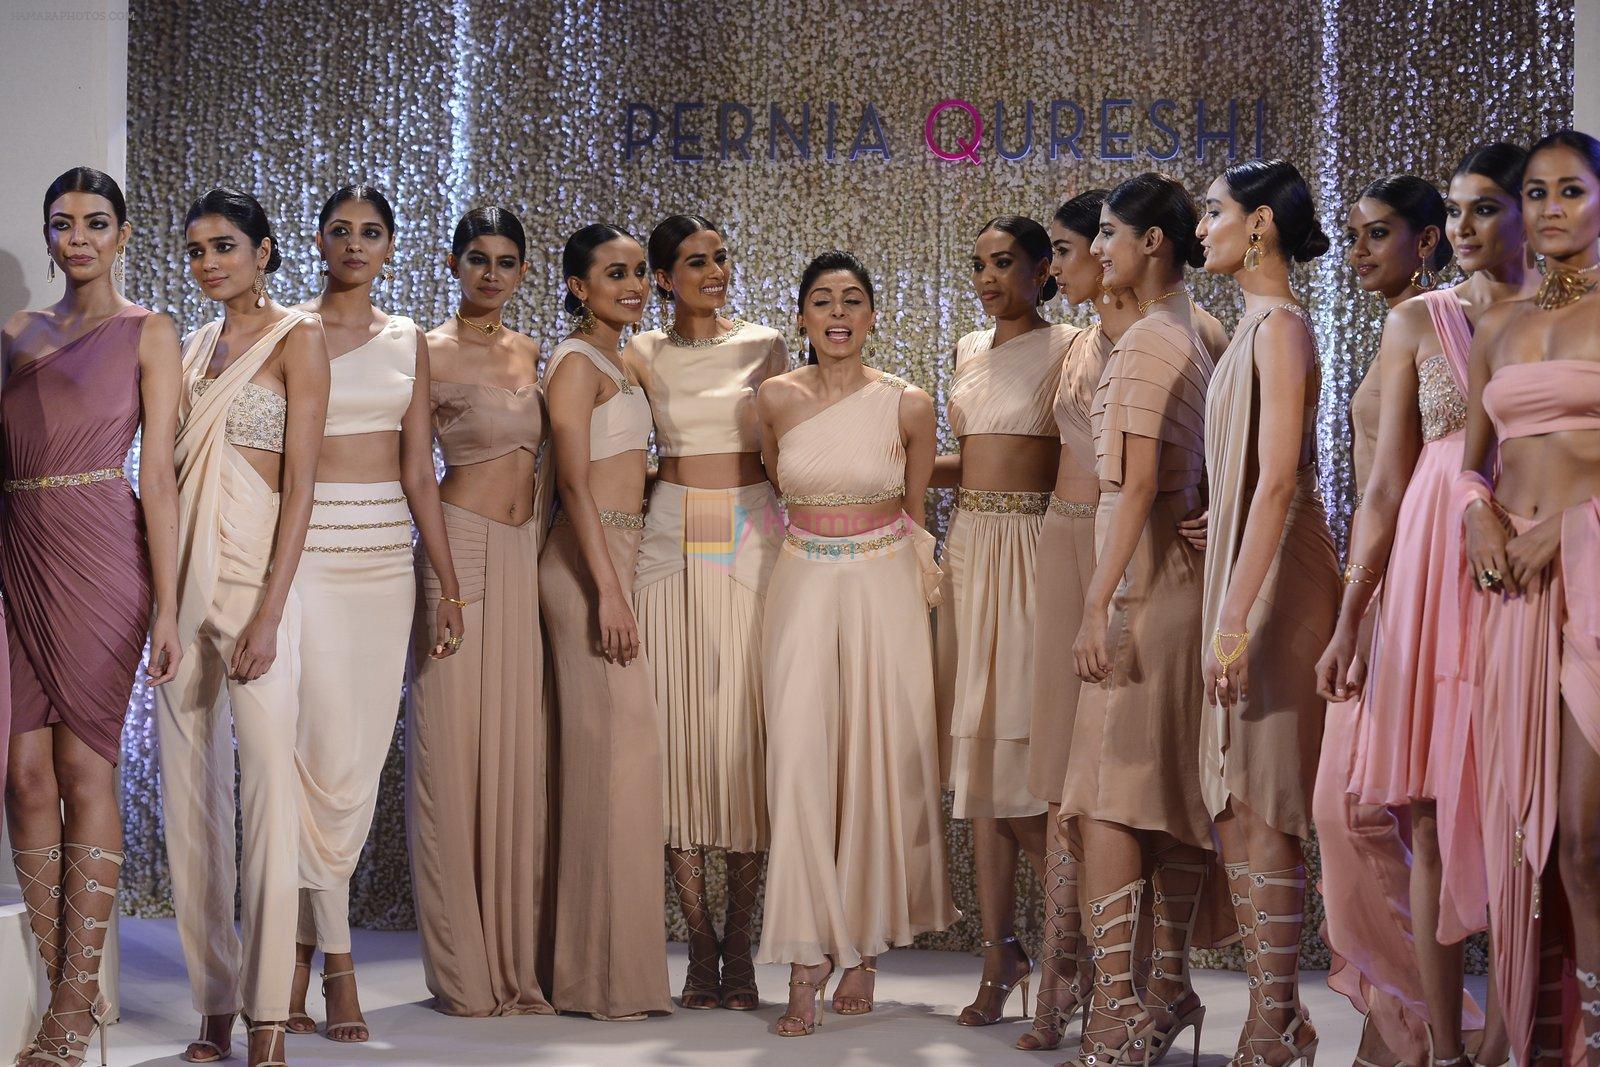 Pernia Qureshi's standalone show on 9th June 2016